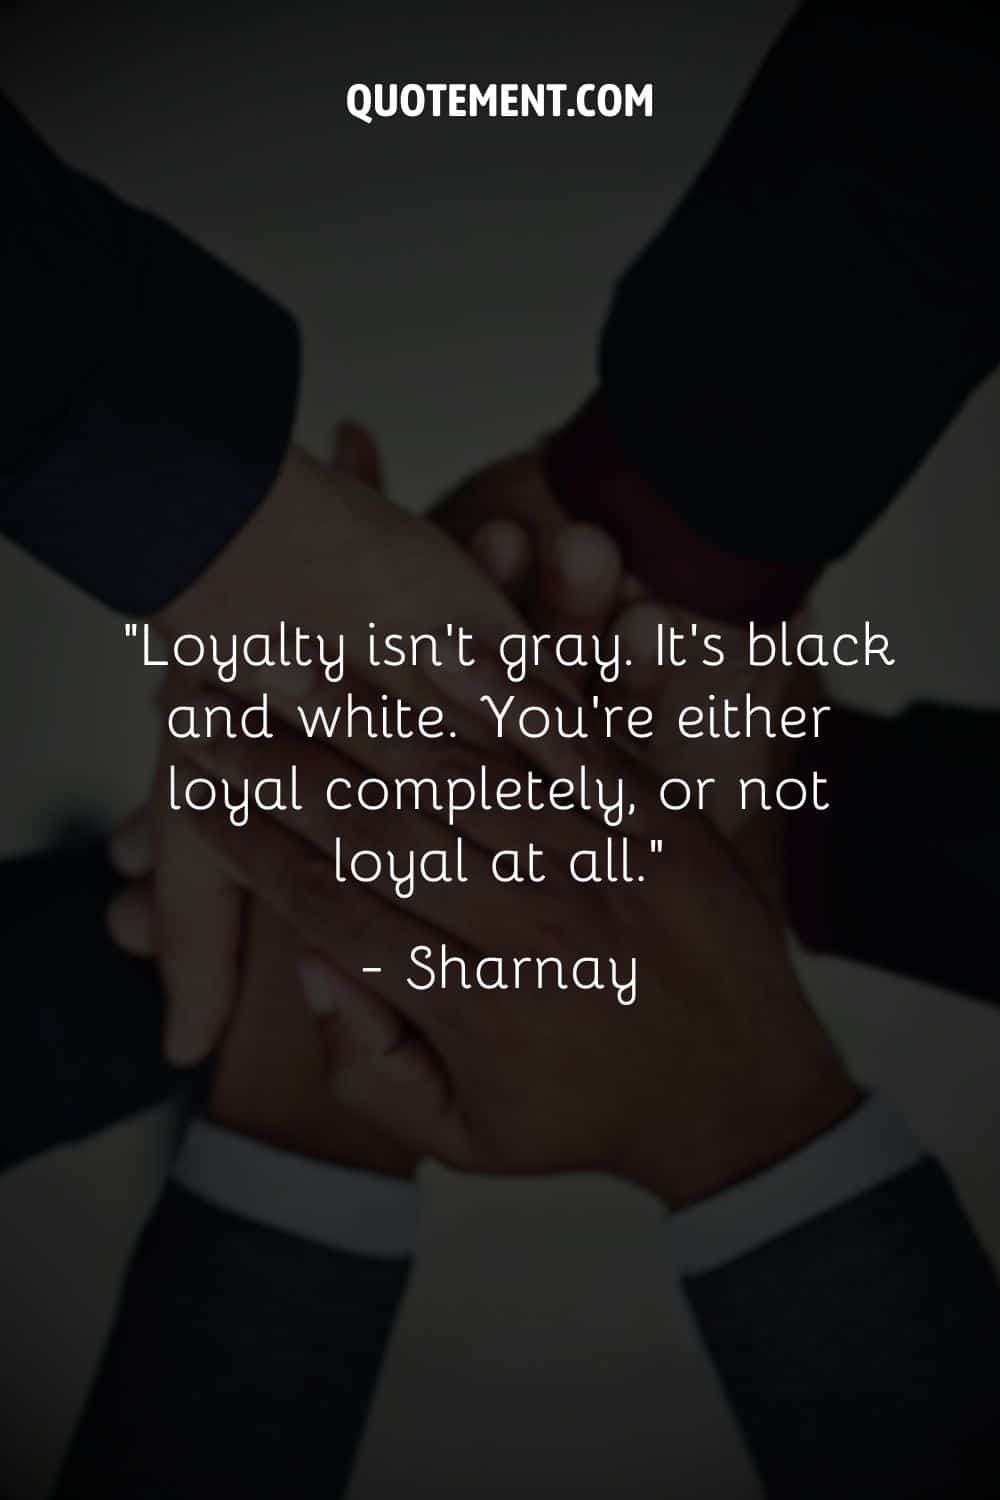 Loyalty isn't gray. It's black and white. You're either loyal completely, or not loyal at all. — Sharnay